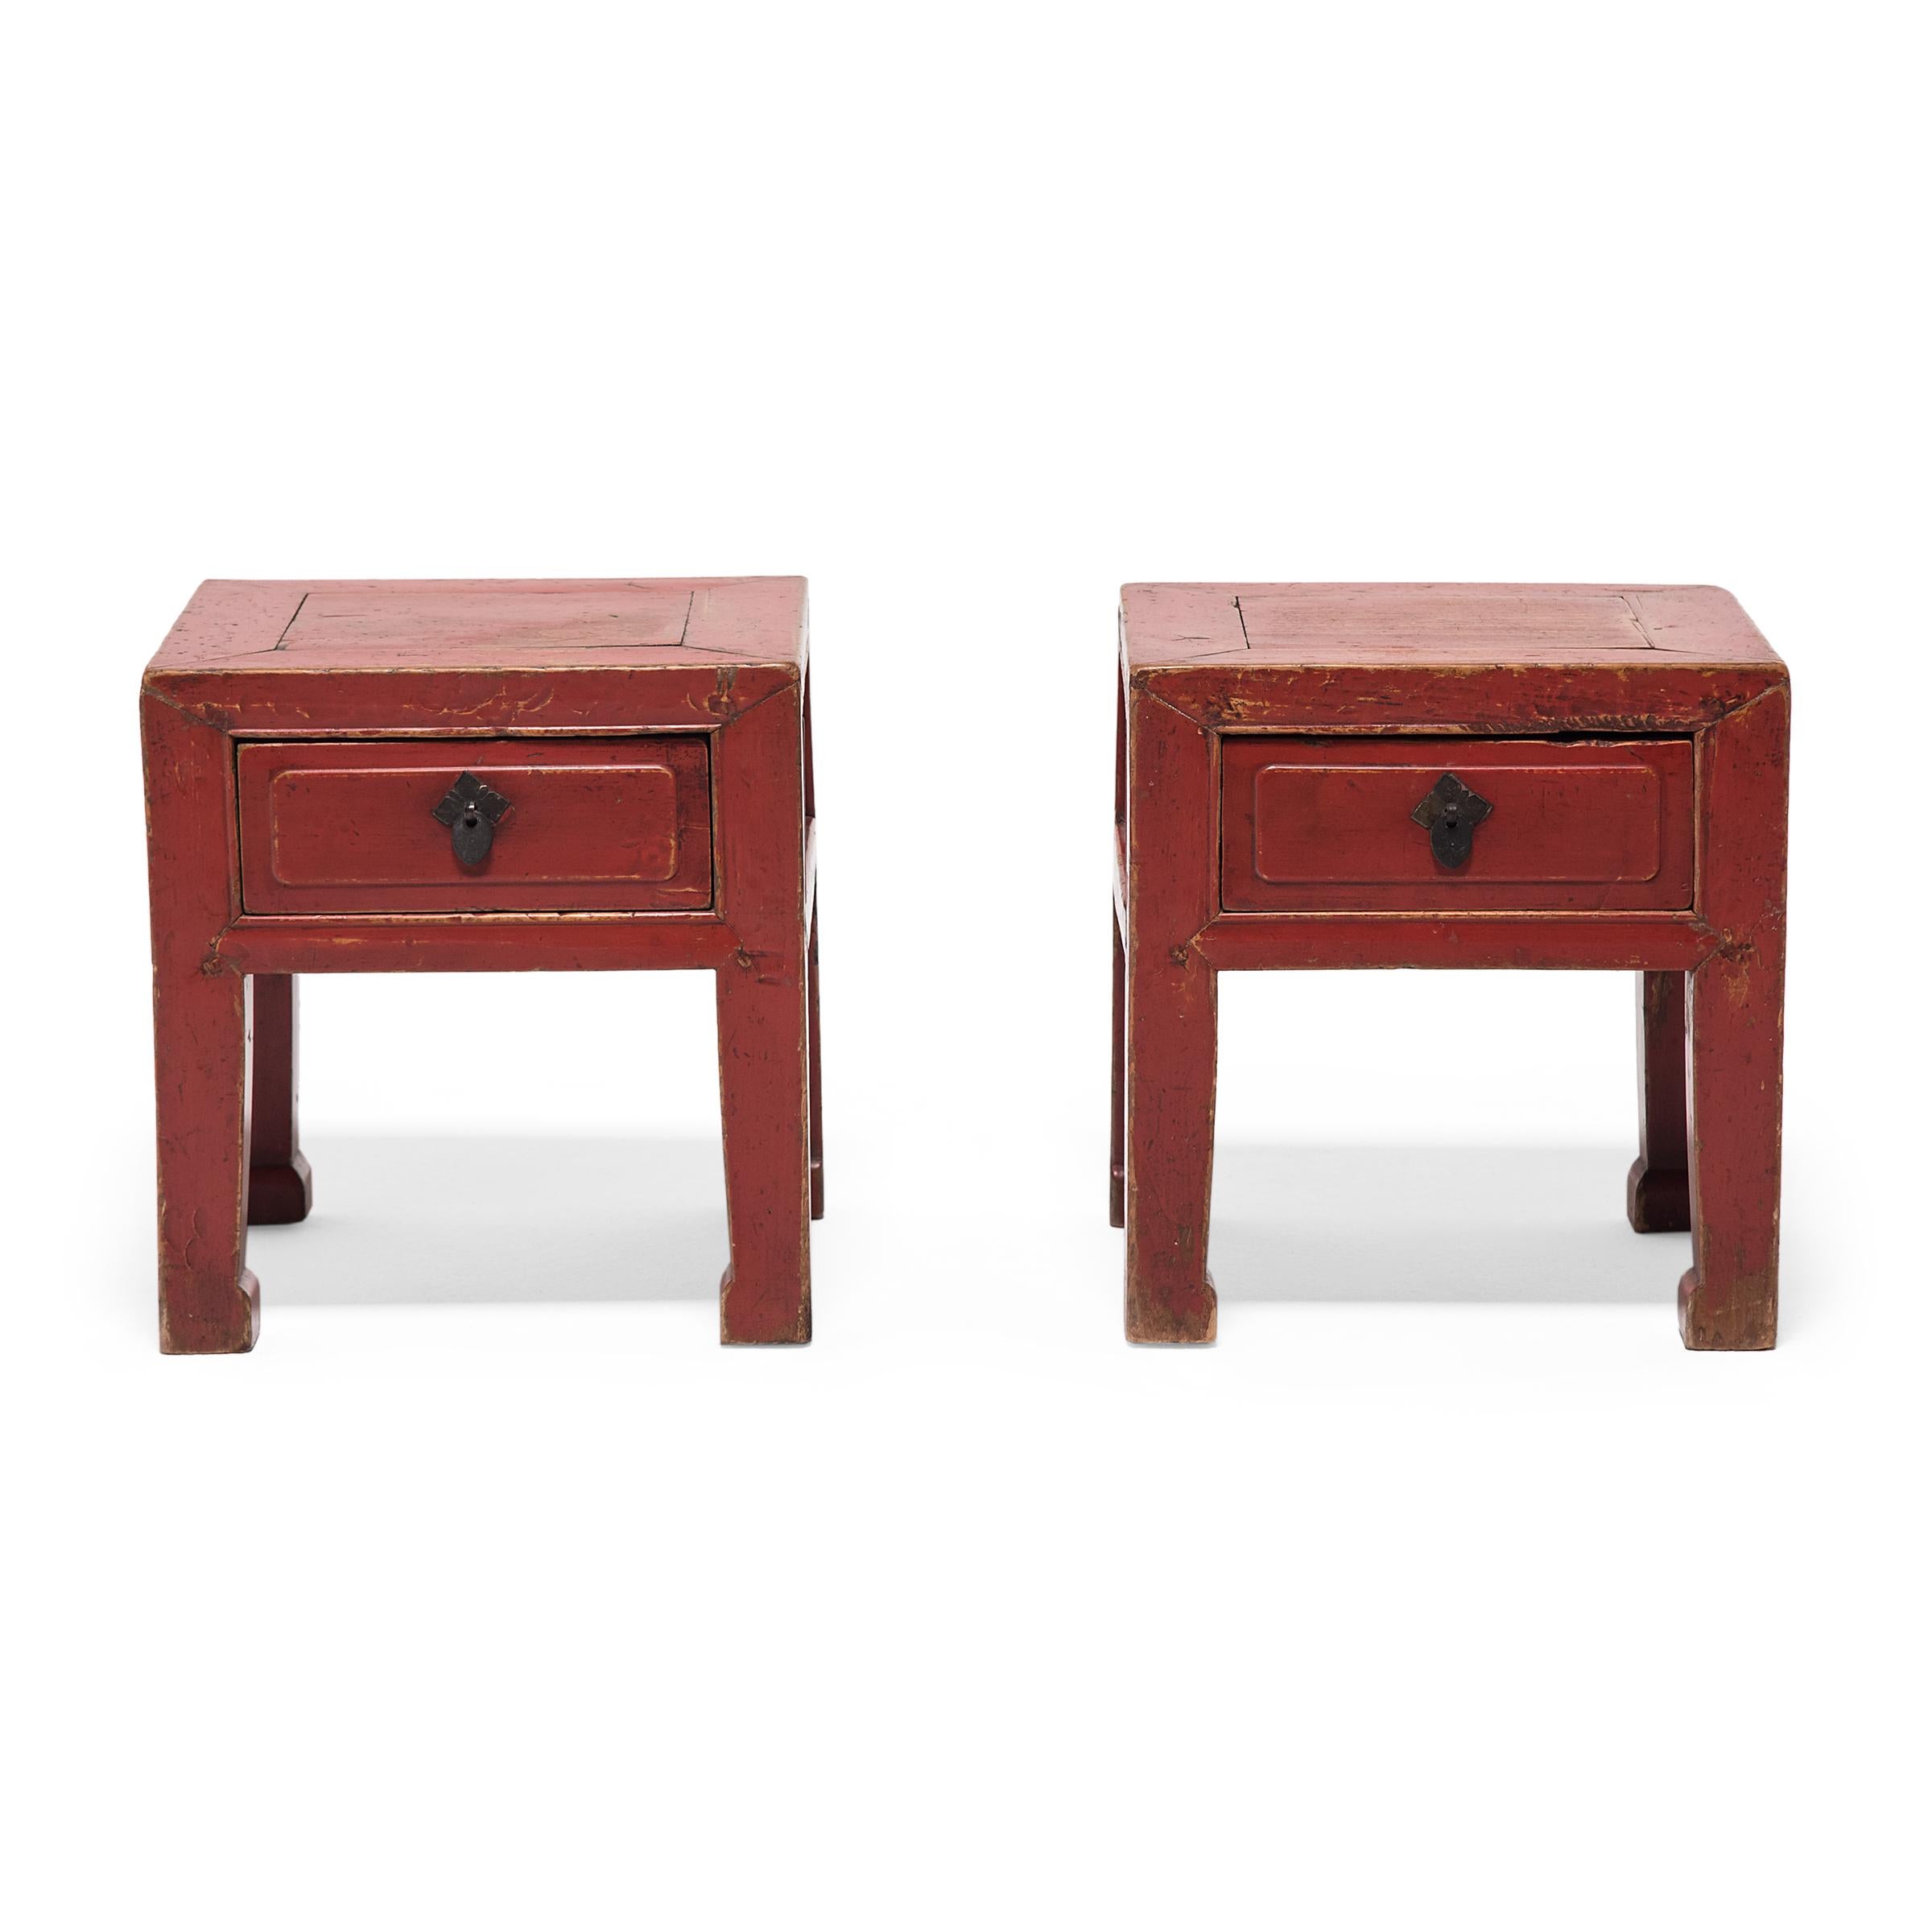 Stools have been a favored form of seating in Chinese culture for centuries. Found in a variety of materials and forms, the stool transcends class lines, as much at home in the Provincial courtyard as it is in the grand hall of a wealthy